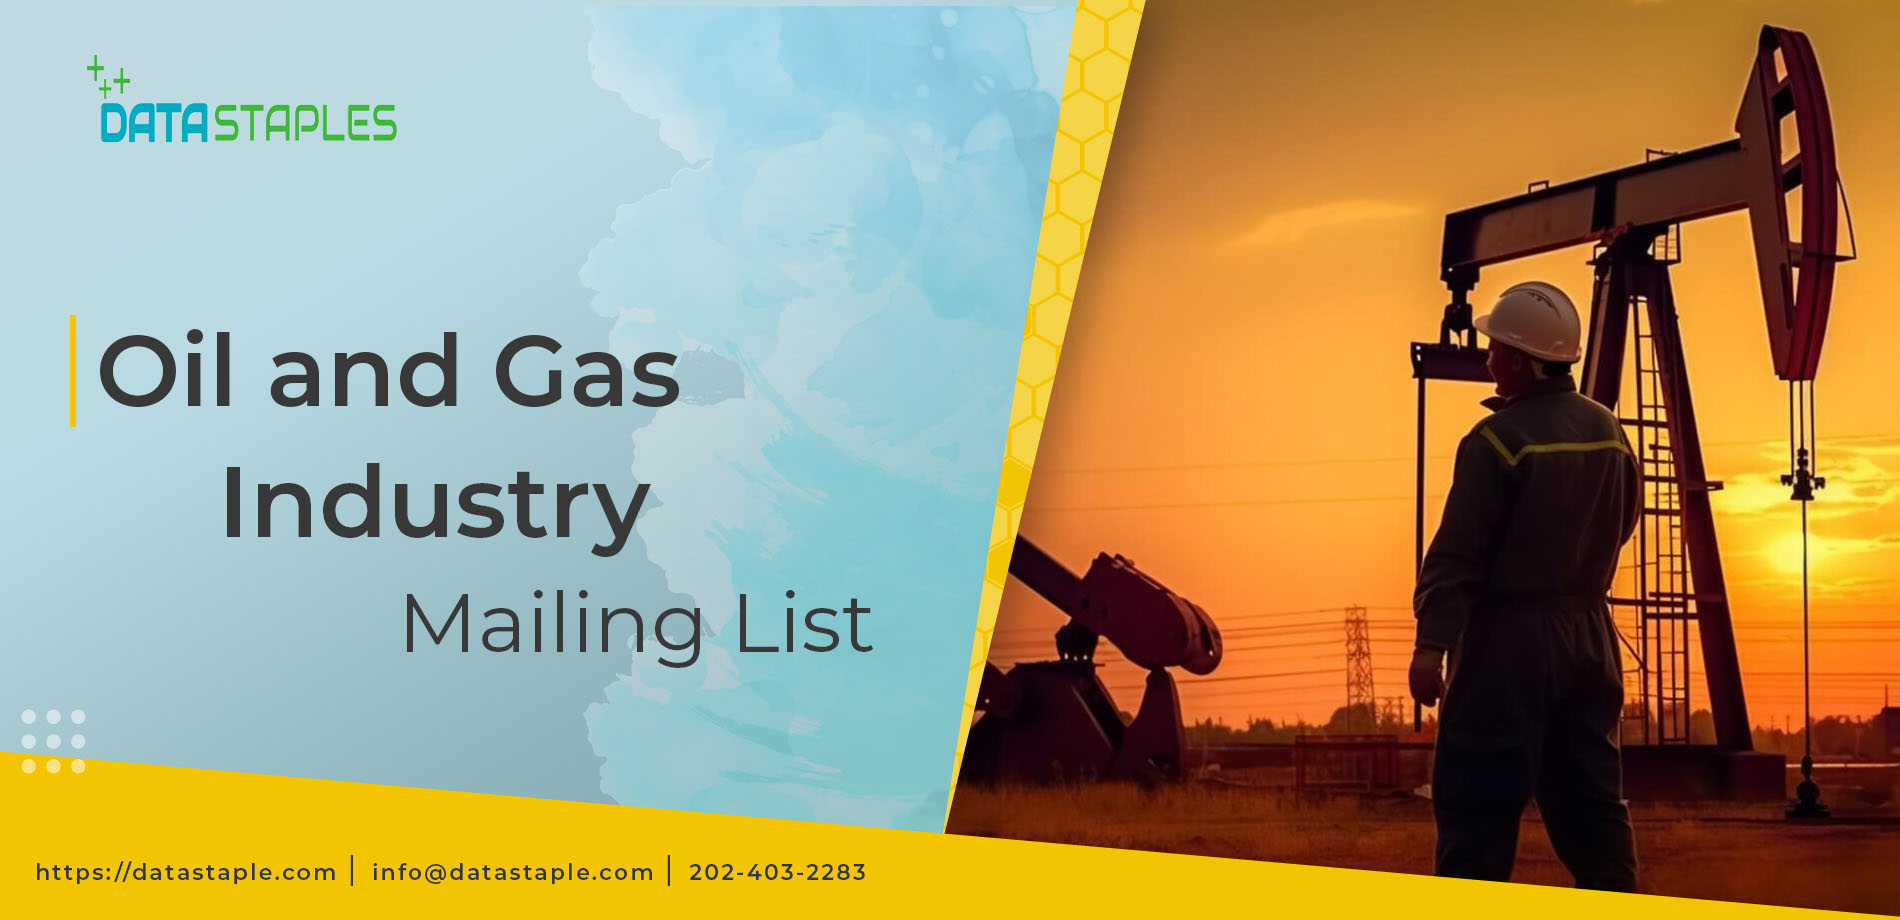 Oil and Gas Industry Mailing List | DataStaples